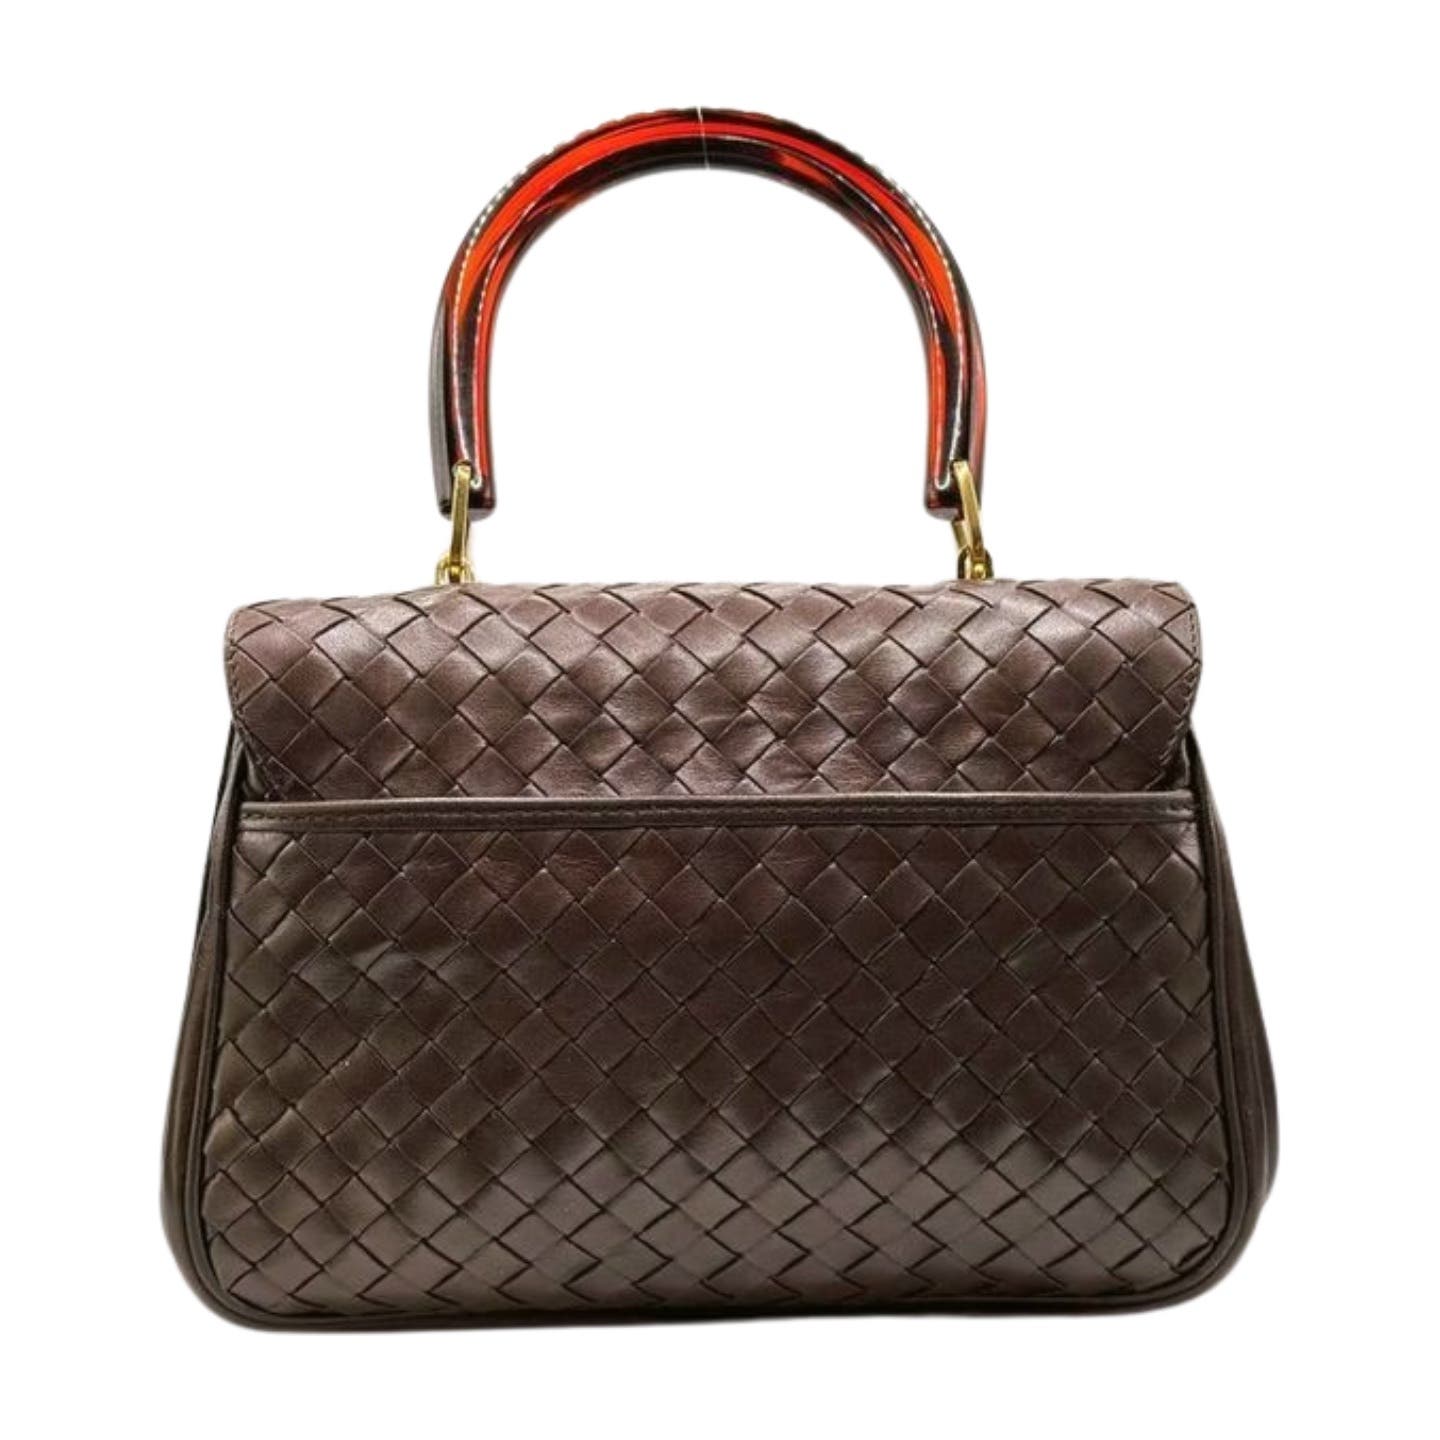 A Bottega Veneta Intrecciato Top Handle Bag, featuring a single top handle with red detailing on the underside. The bag has a structured, rectangular shape with clean, elegant lines reminiscent of Bottega Veneta's sophisticated style.